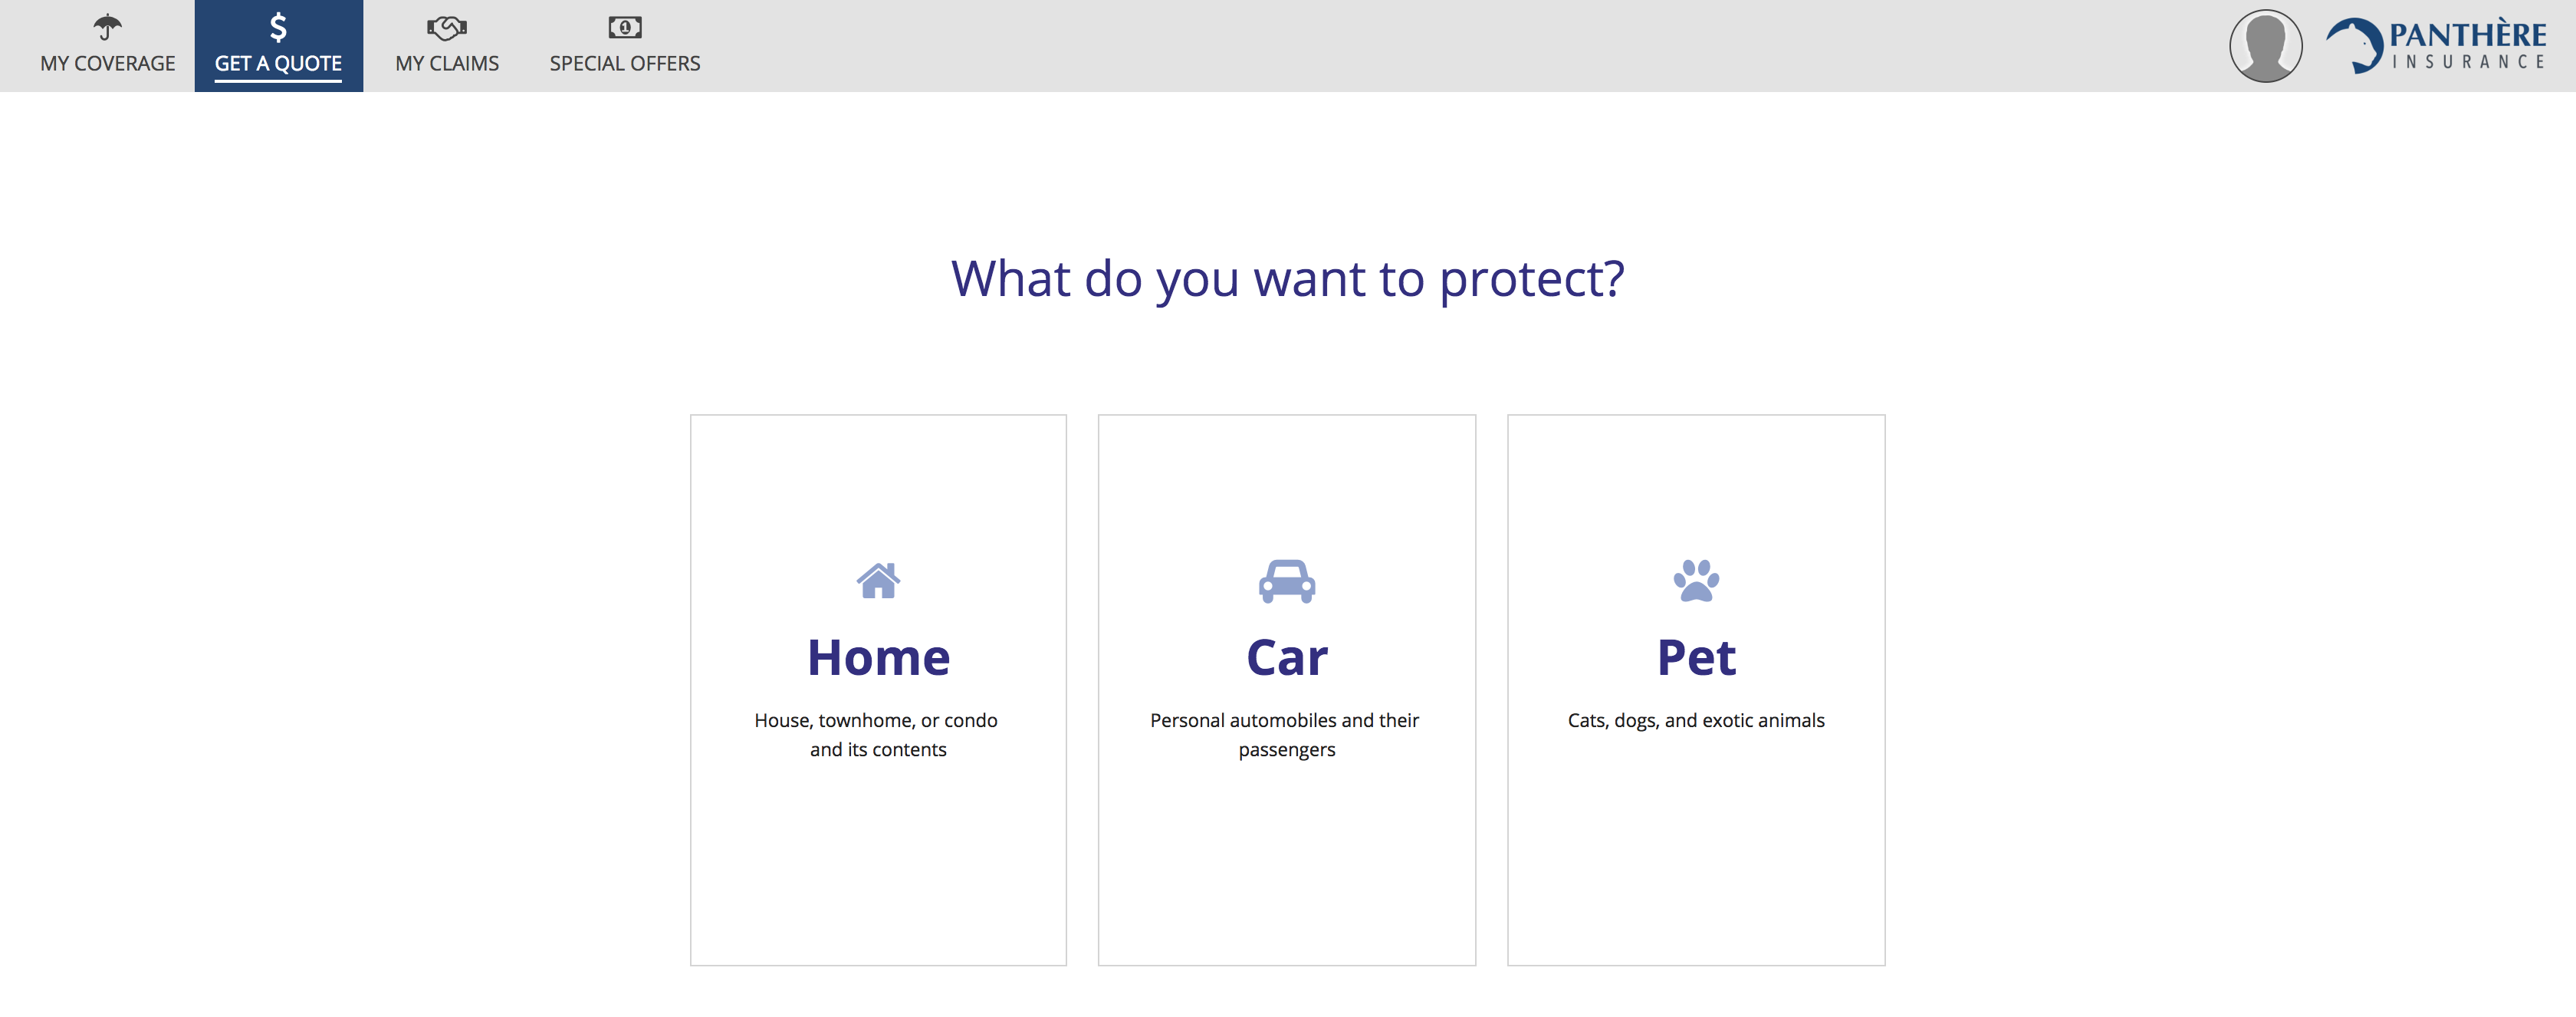 ds-images/ux_pages/insurance_2.png